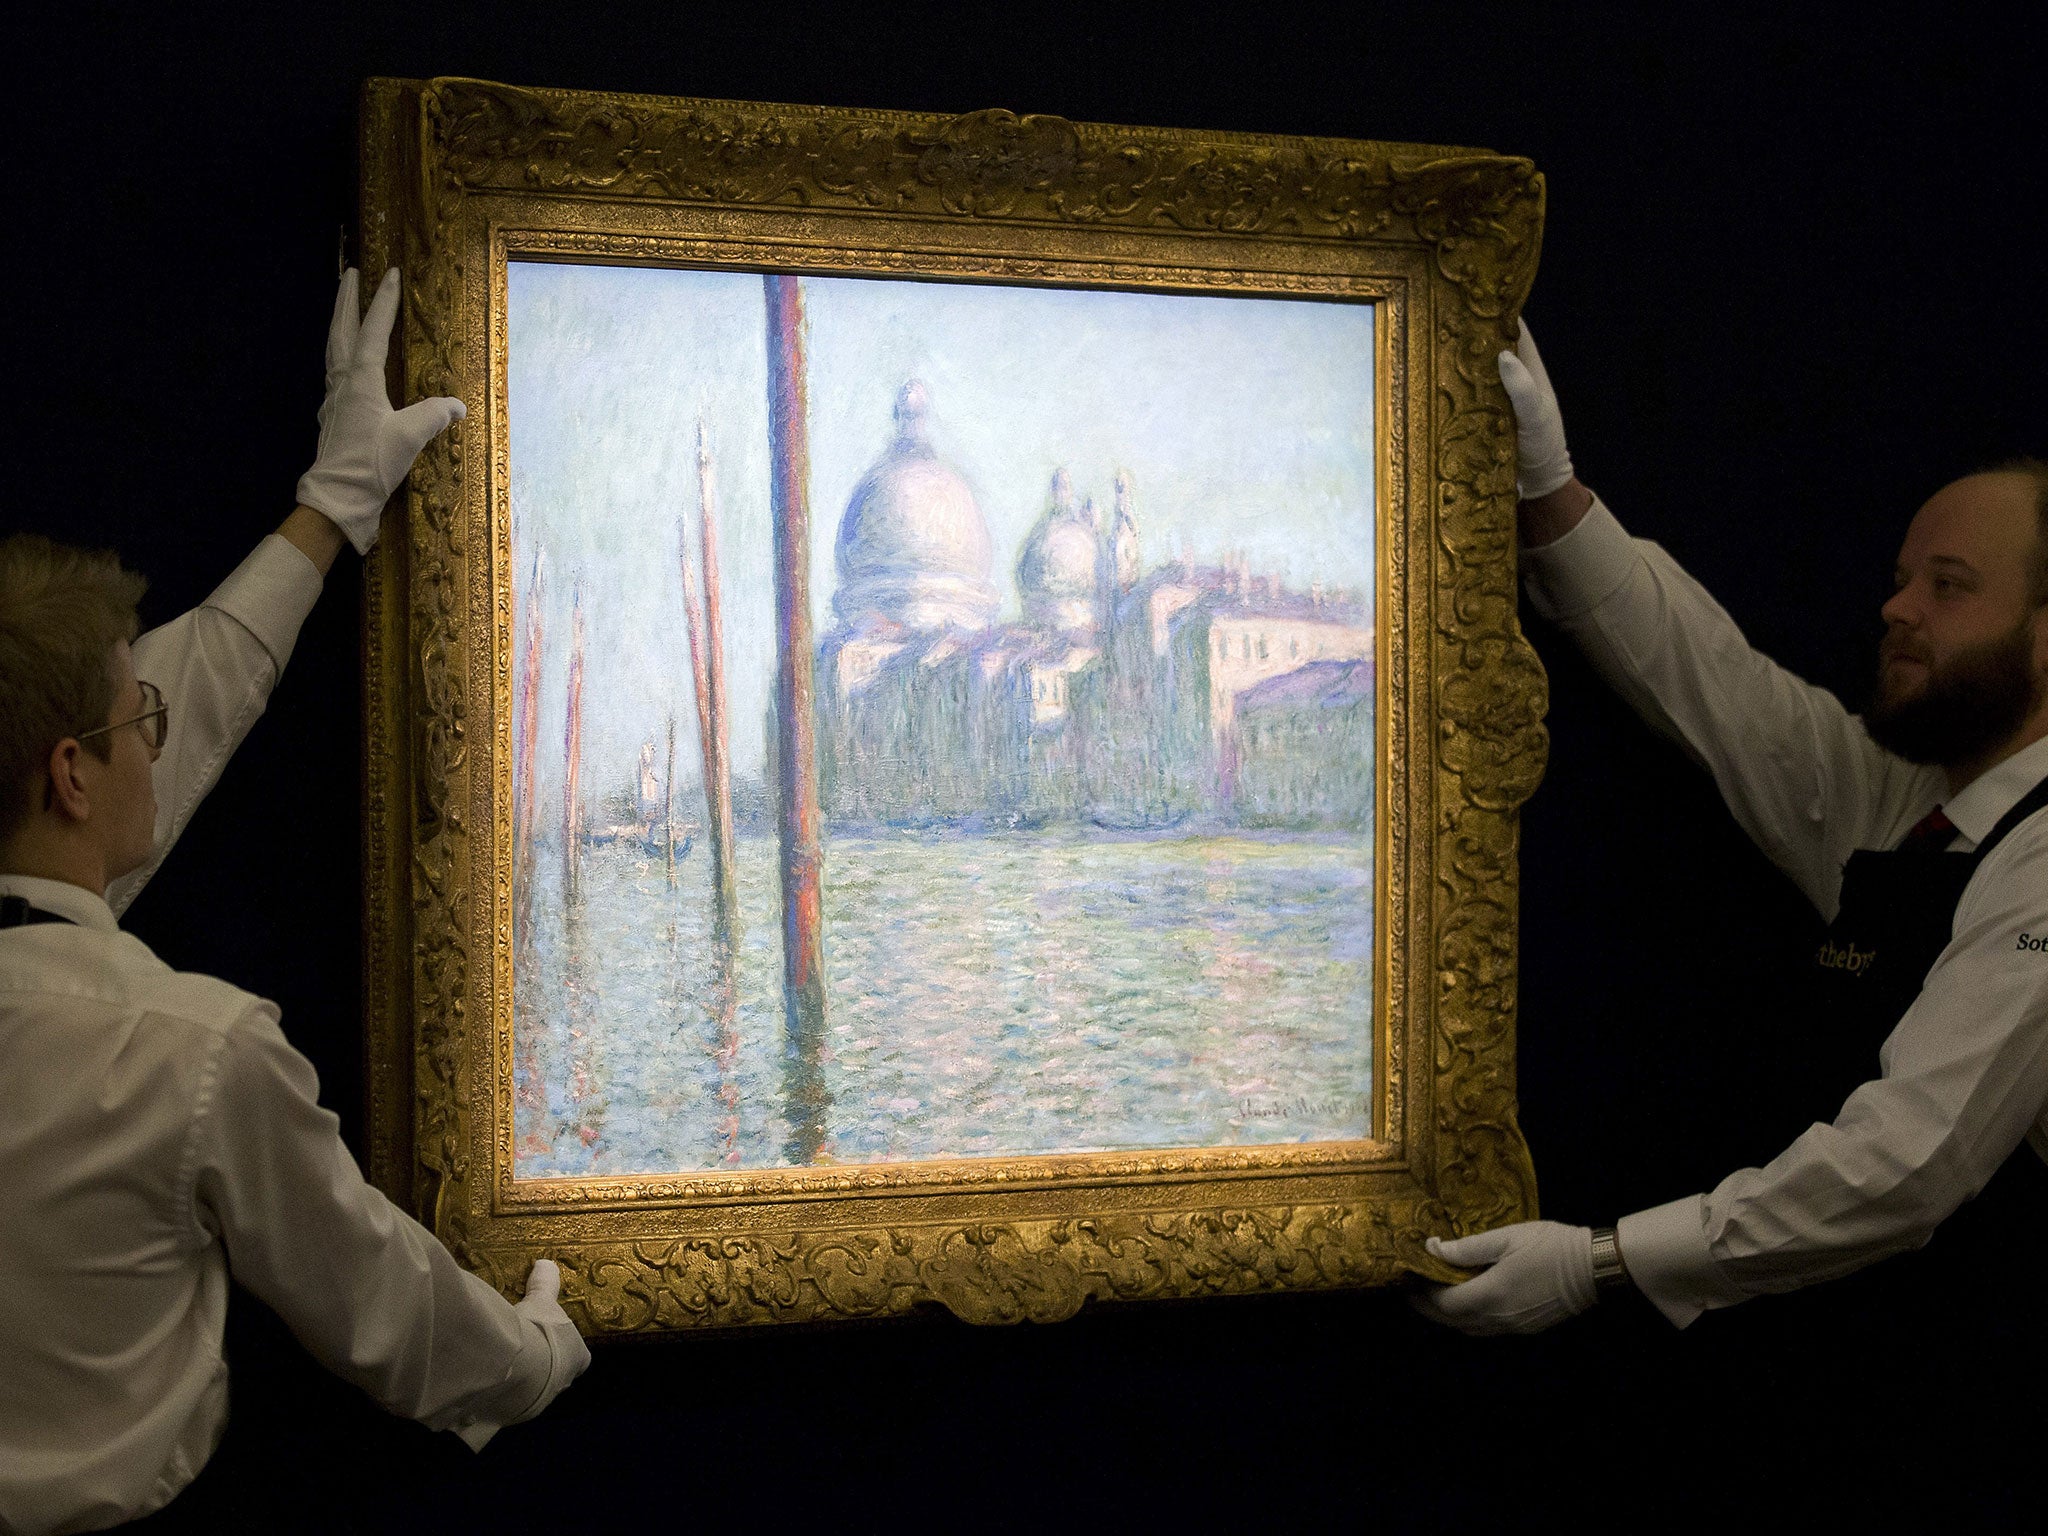 'Le Grand Canal' by Claude Monet is auctioned at Sotheby's in London